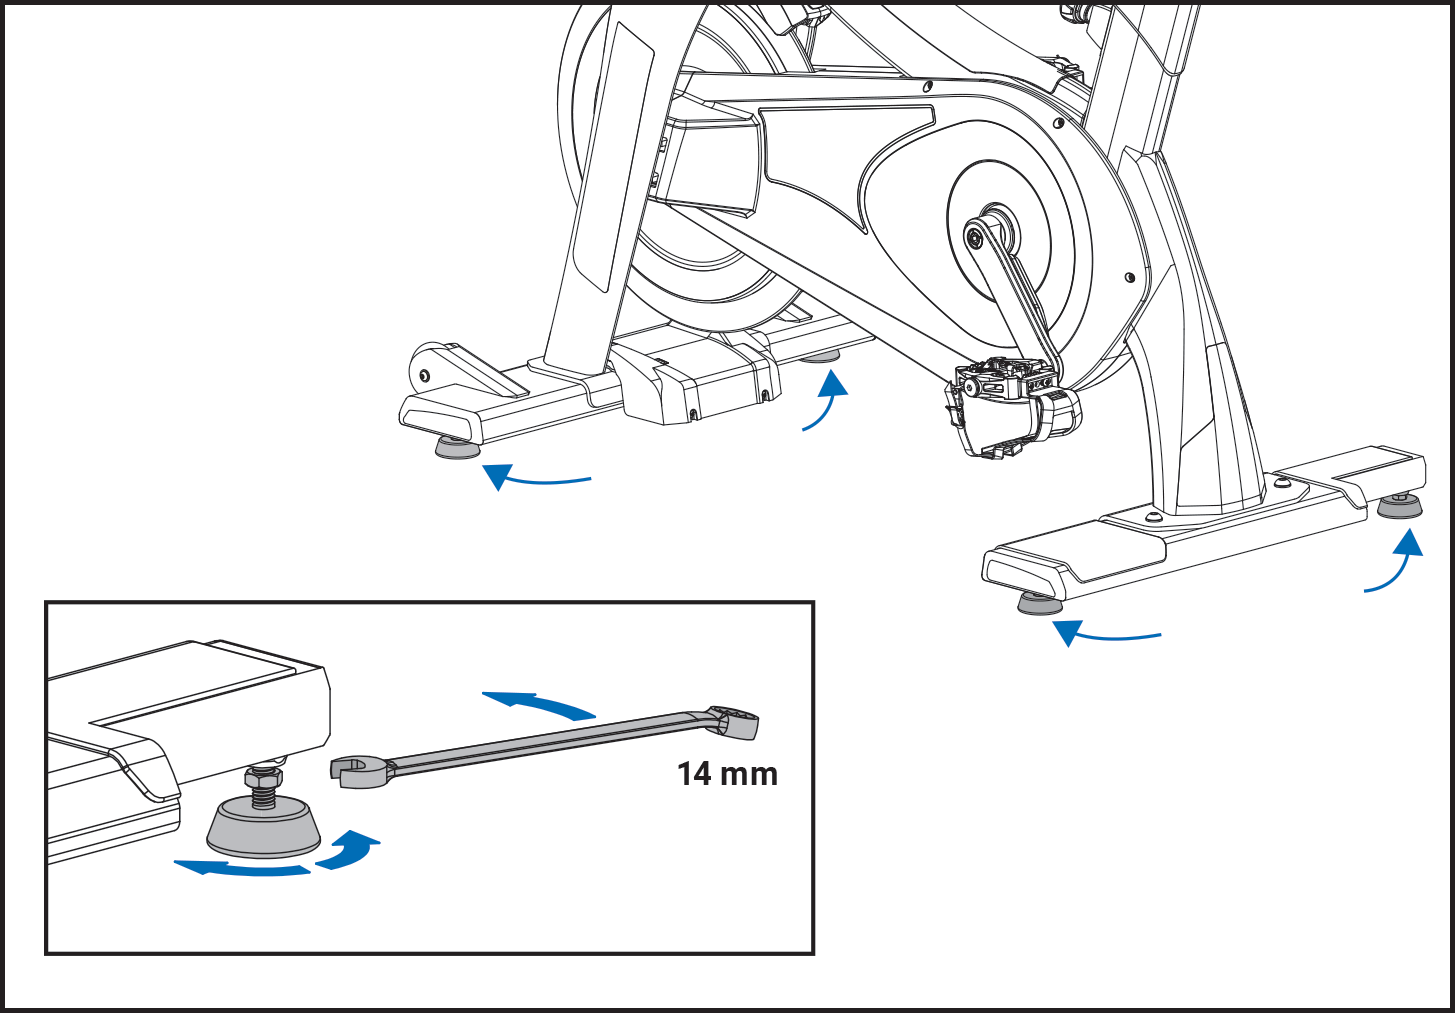 Tighten the leveling feet on the bottom of the Solo bike